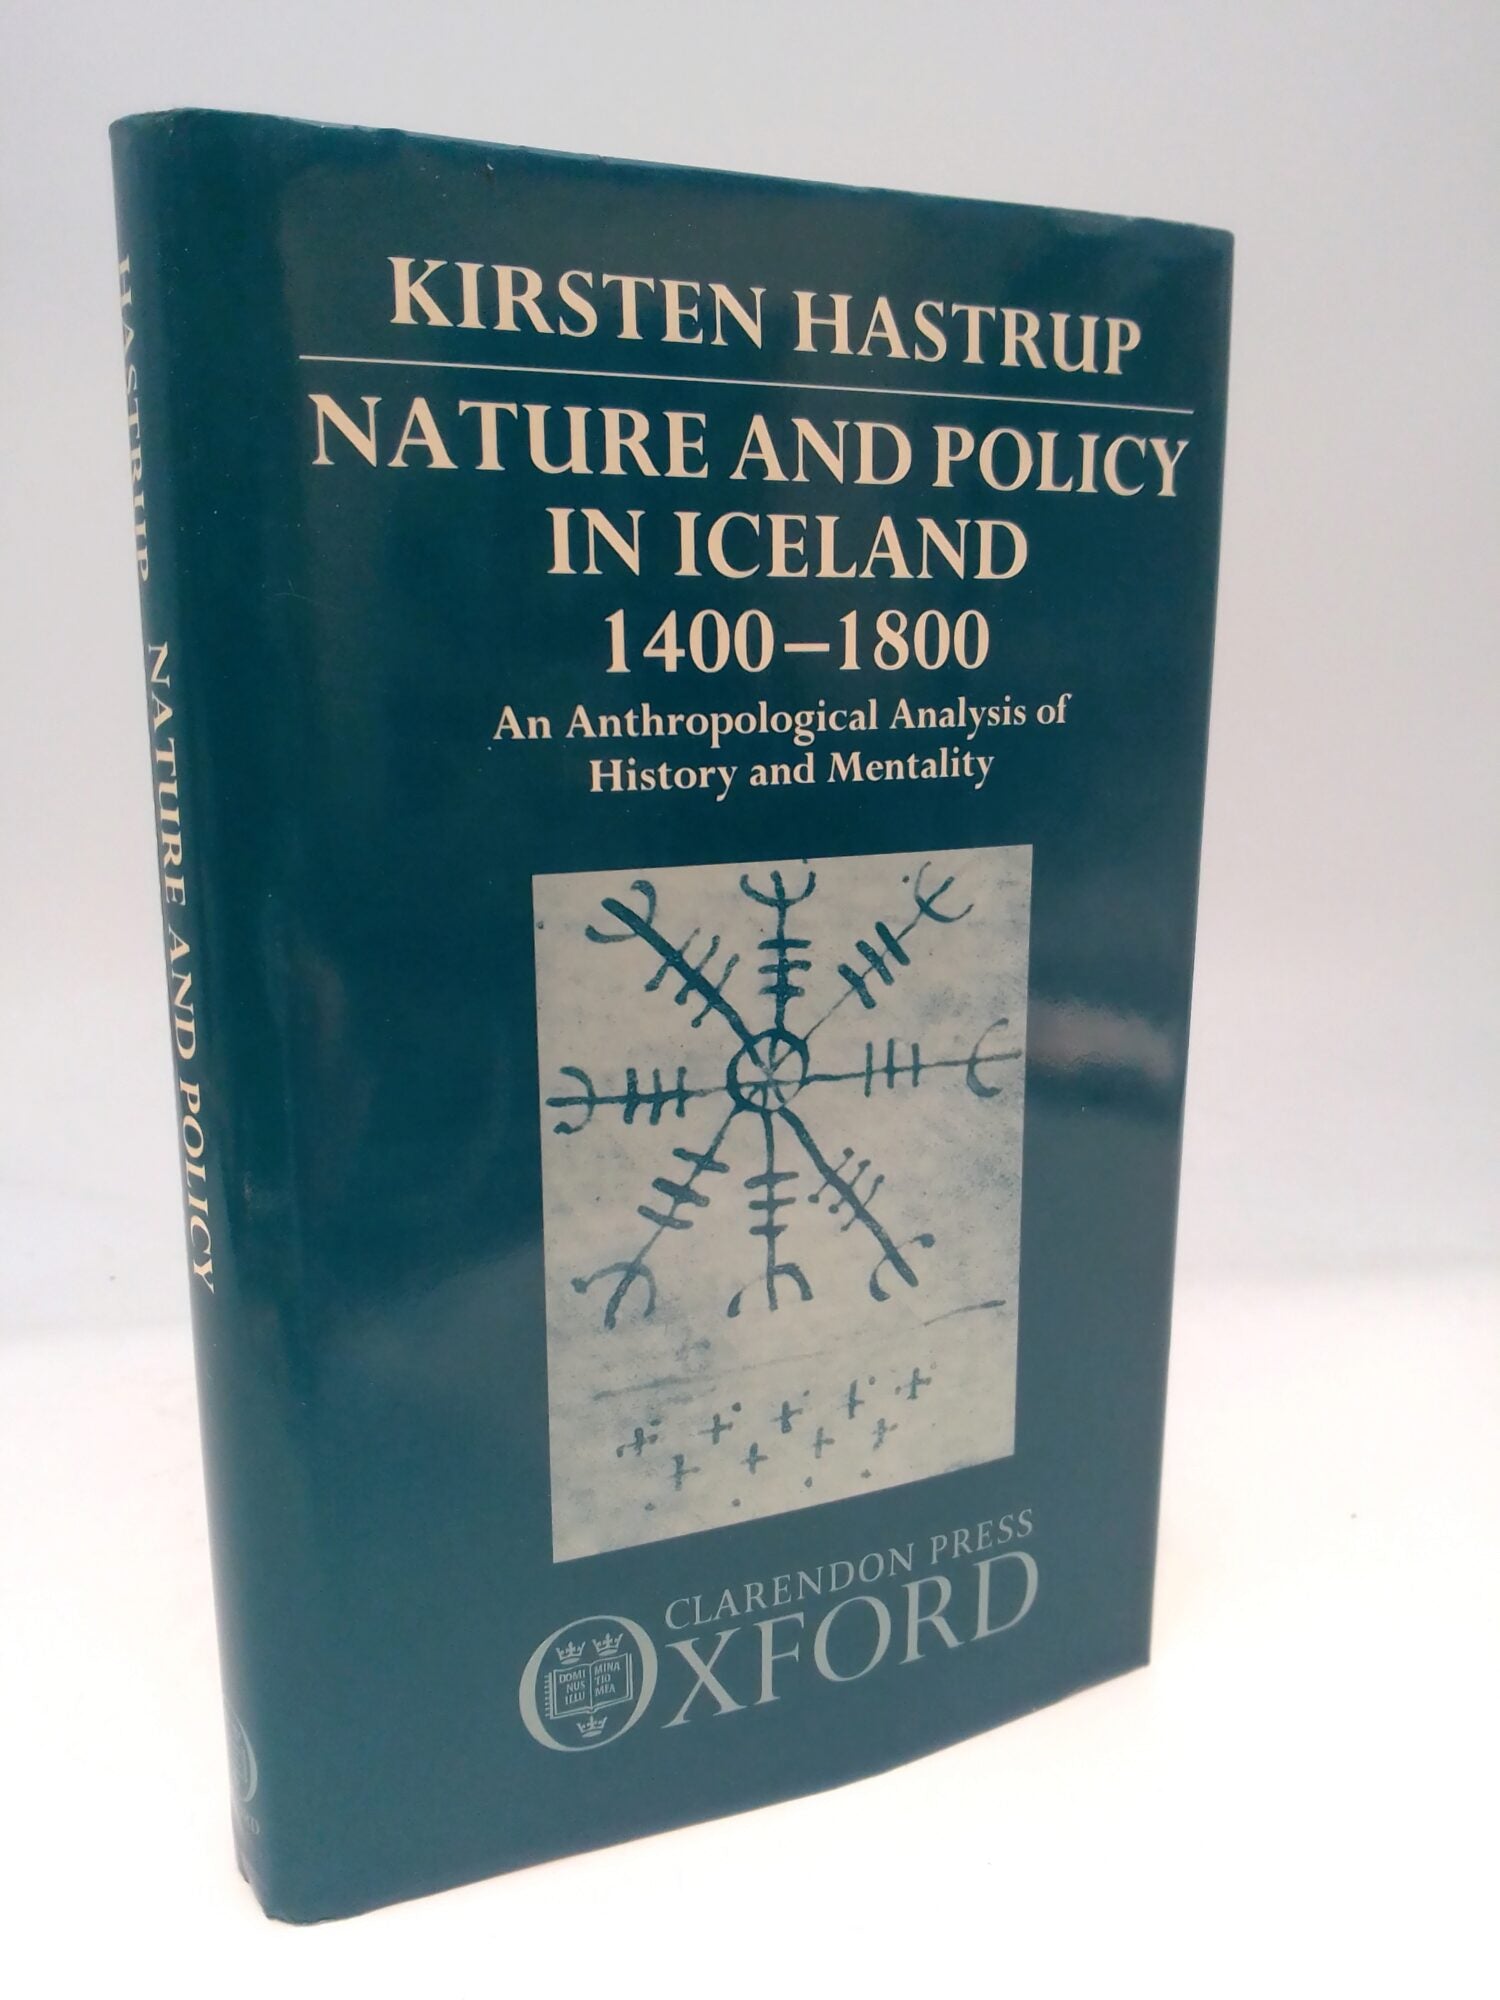 Hastrup, Kirsten | Nature and policy in Iceland 1400-1800 : An anthropological analysis of history and mentality